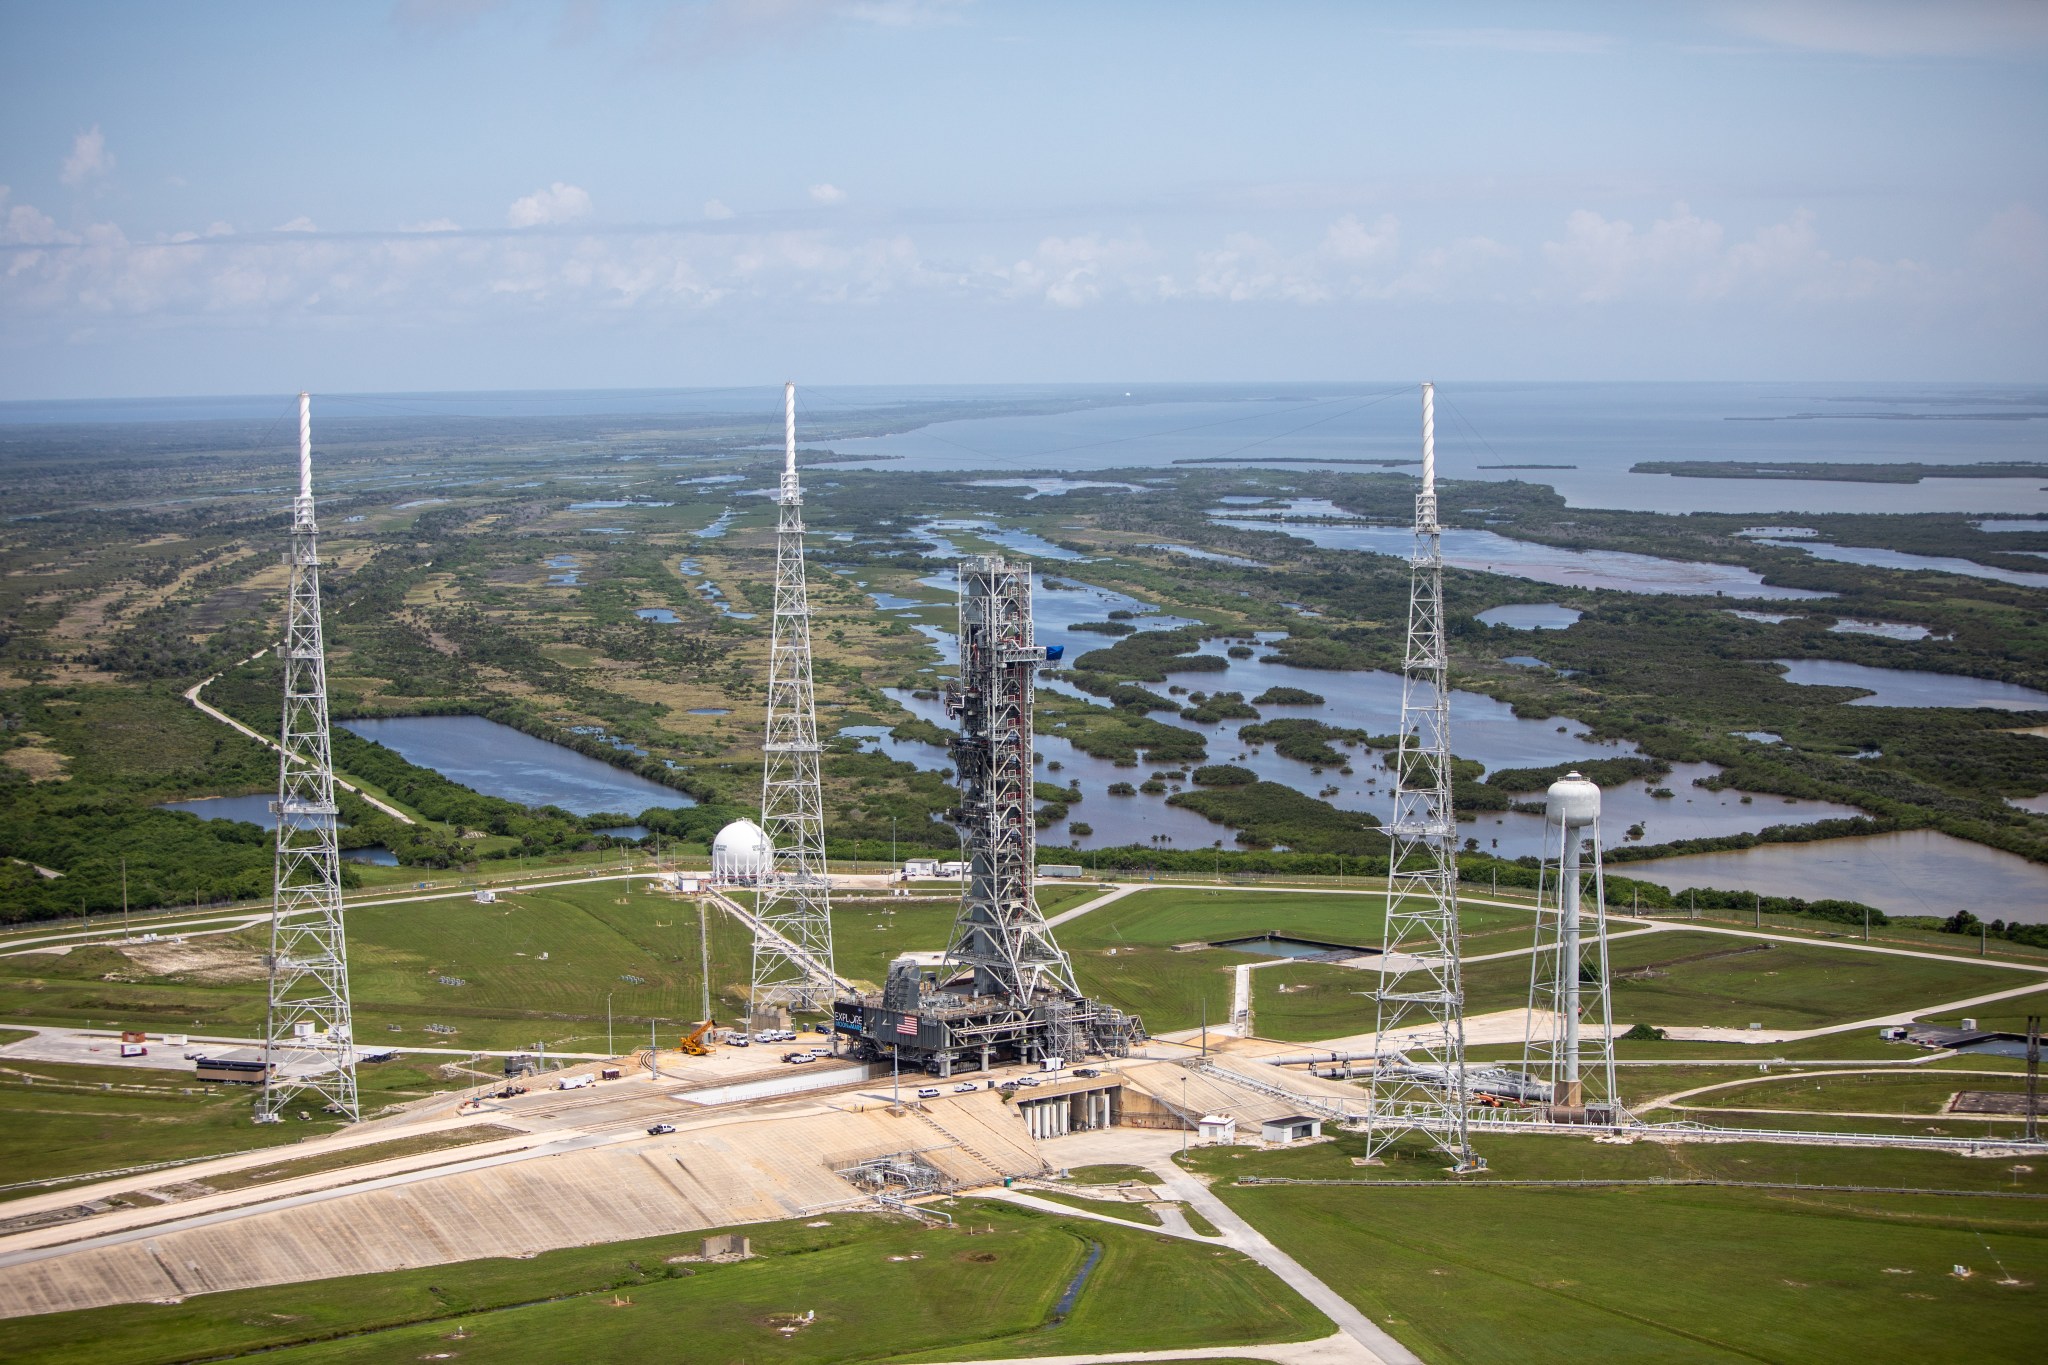 An aerial view of Launch Complex 39B at NASA's Kennedy Space Center in Florida.